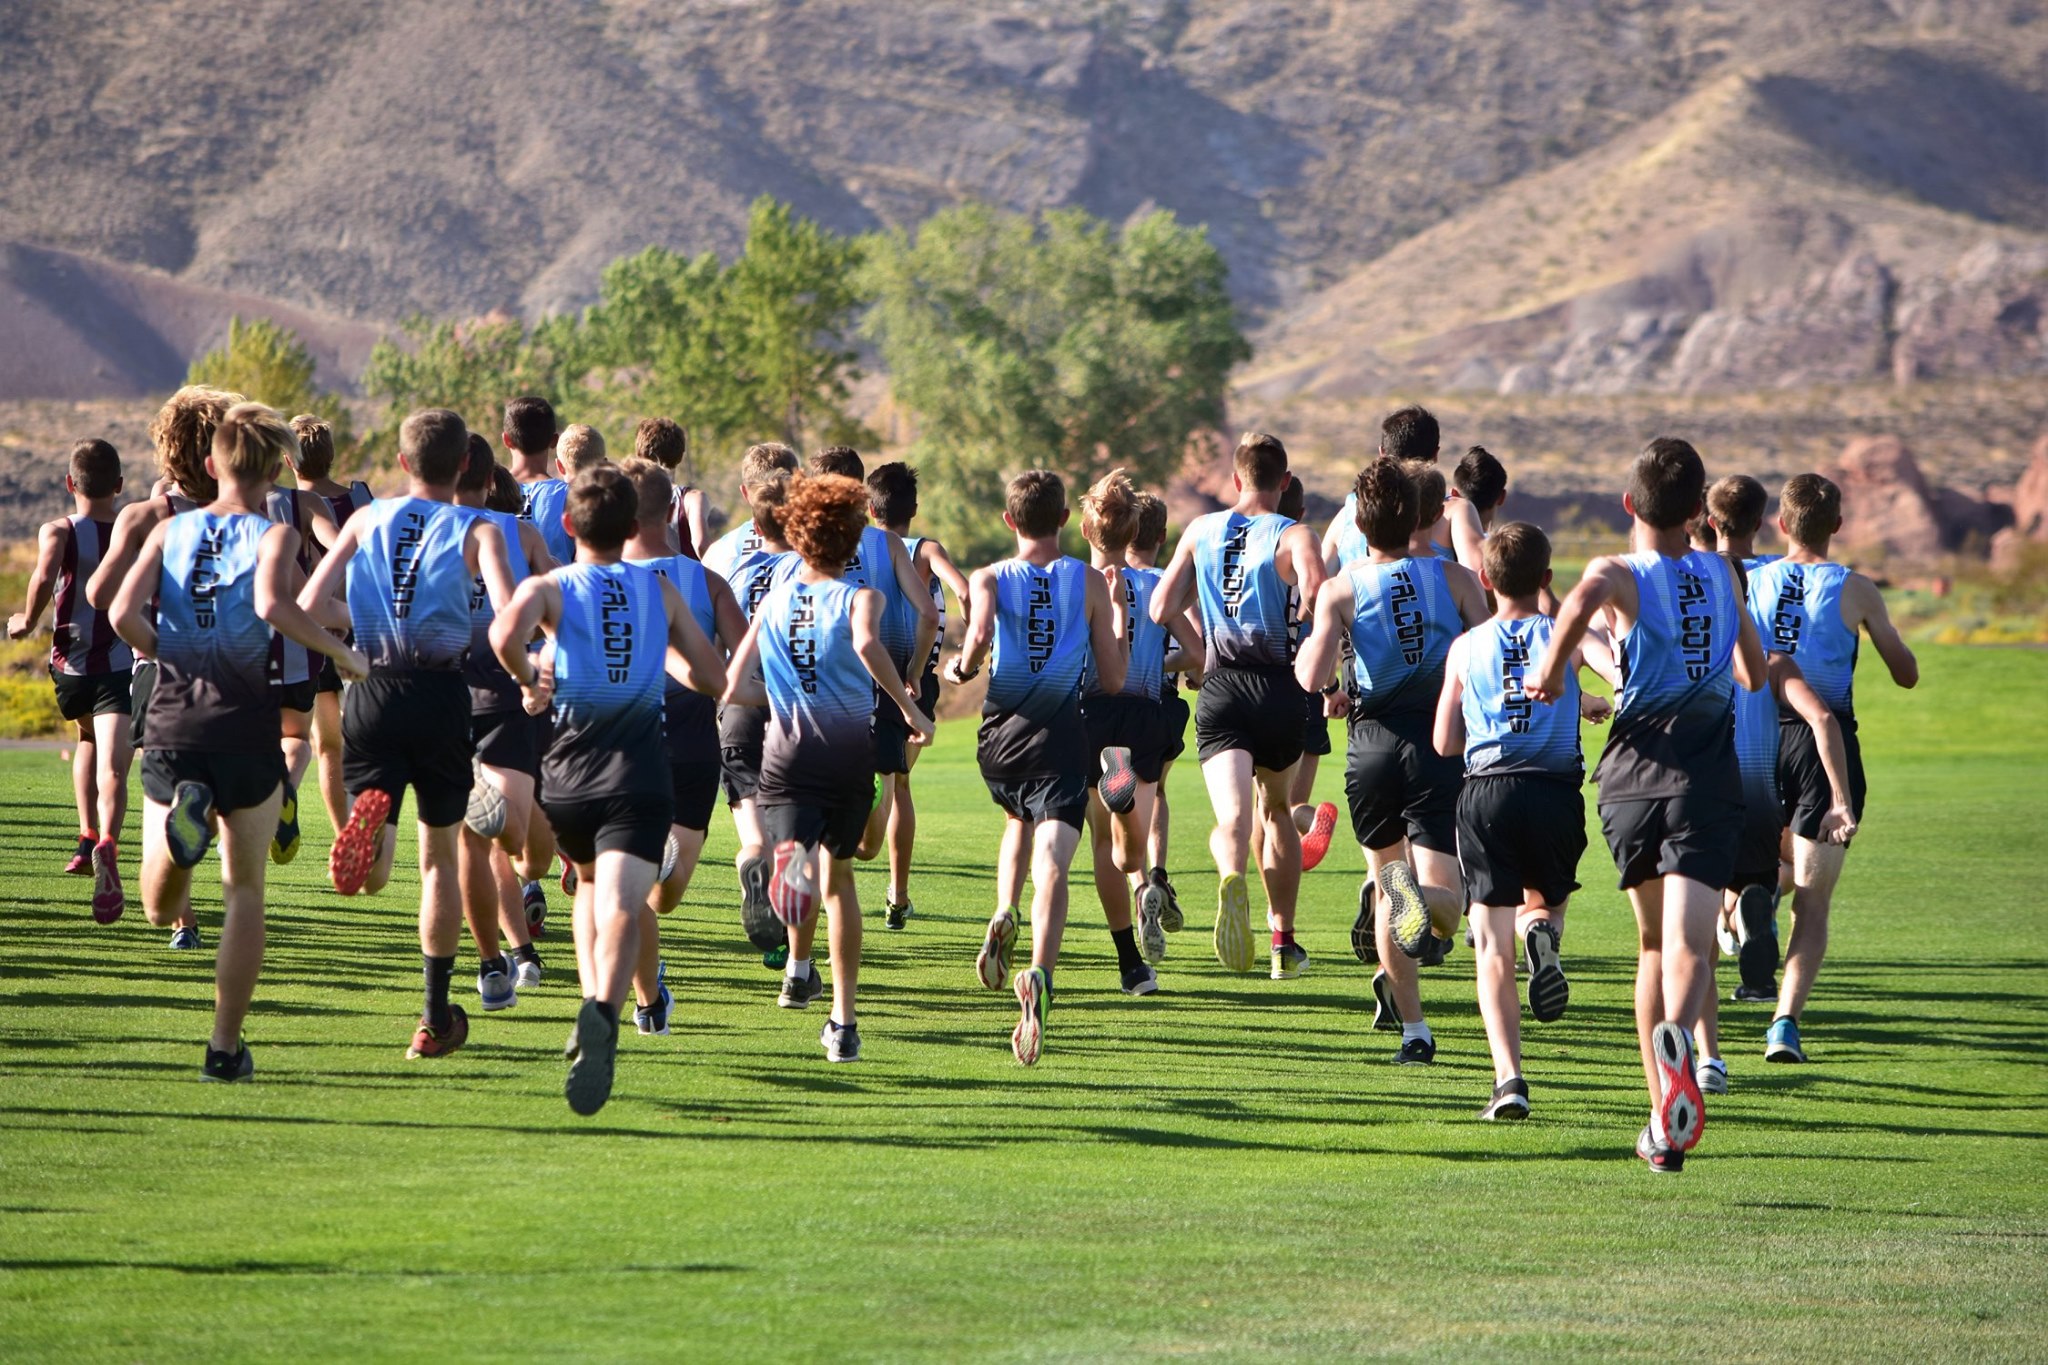 Cross Country team in competition